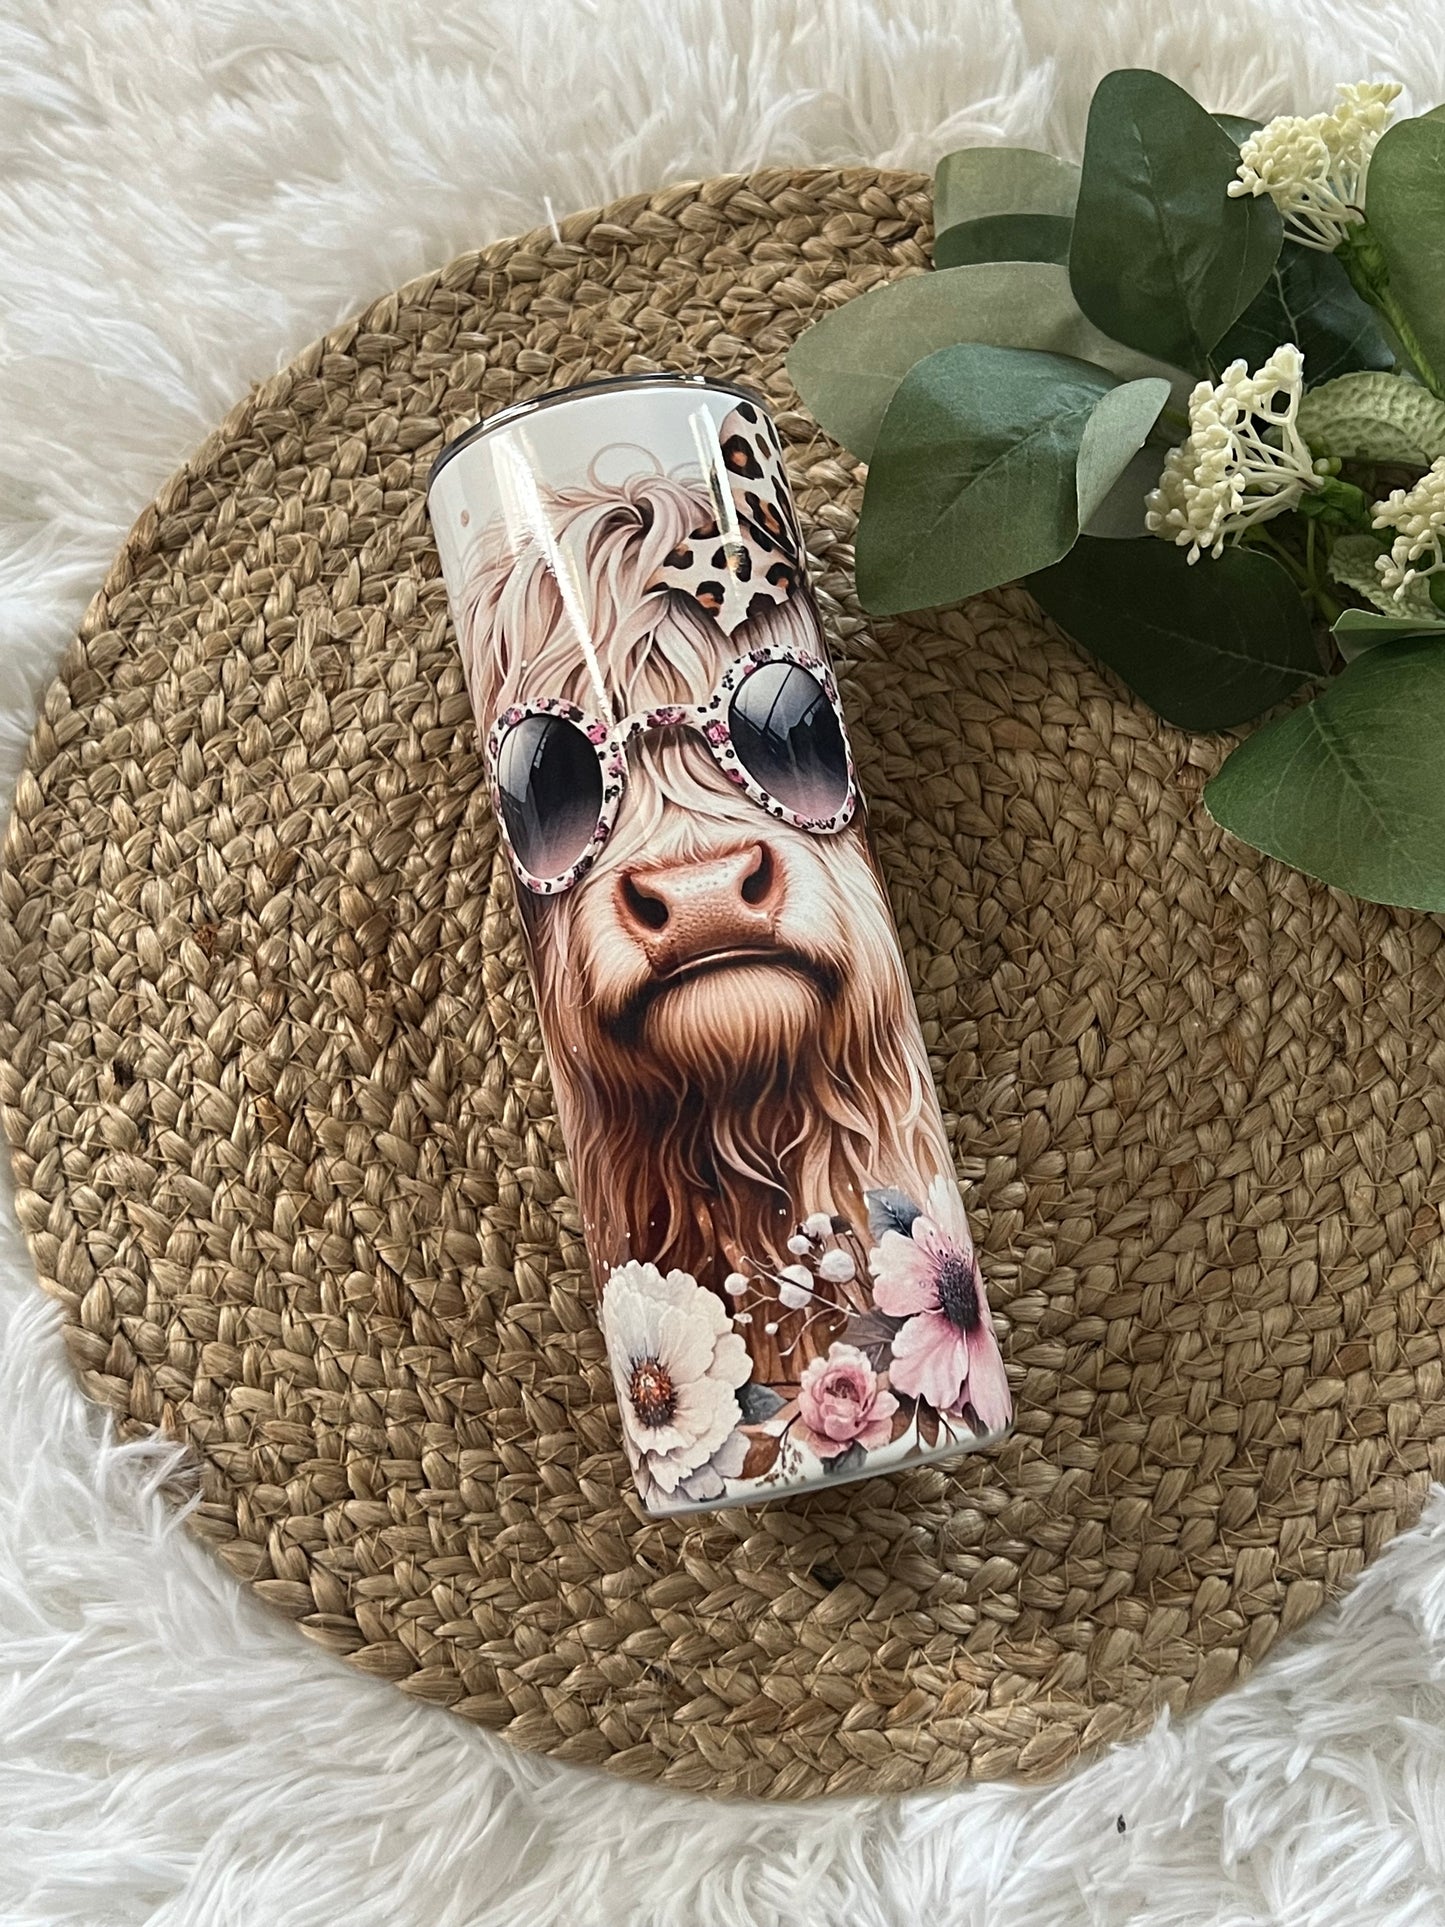 Boujee Highland Cow with Cheetah Glasses